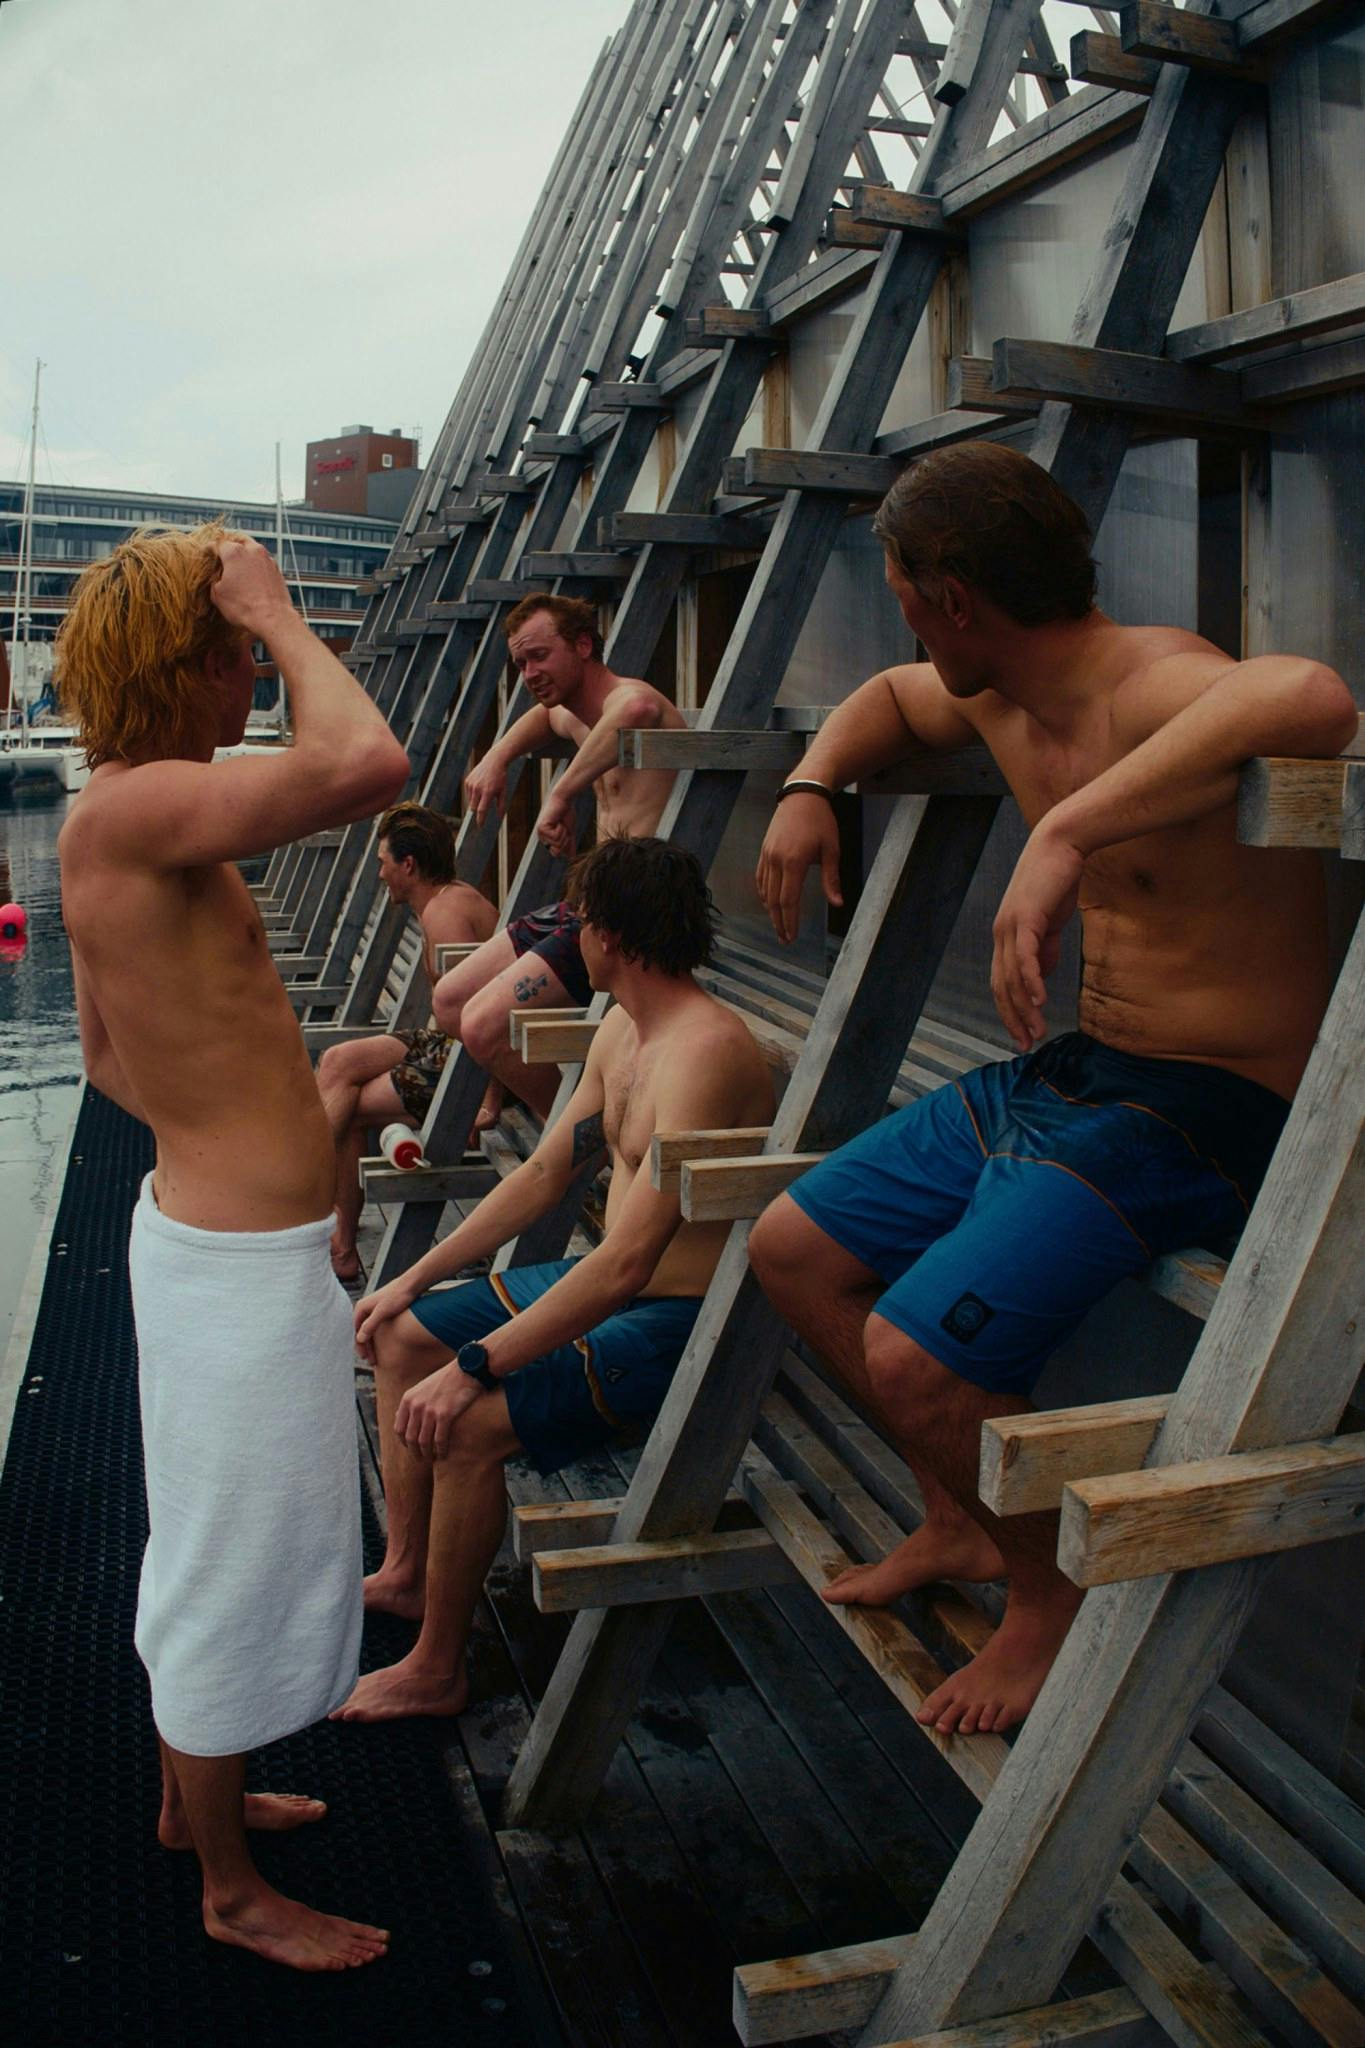 A group of men in swim trunks sitting on a dock